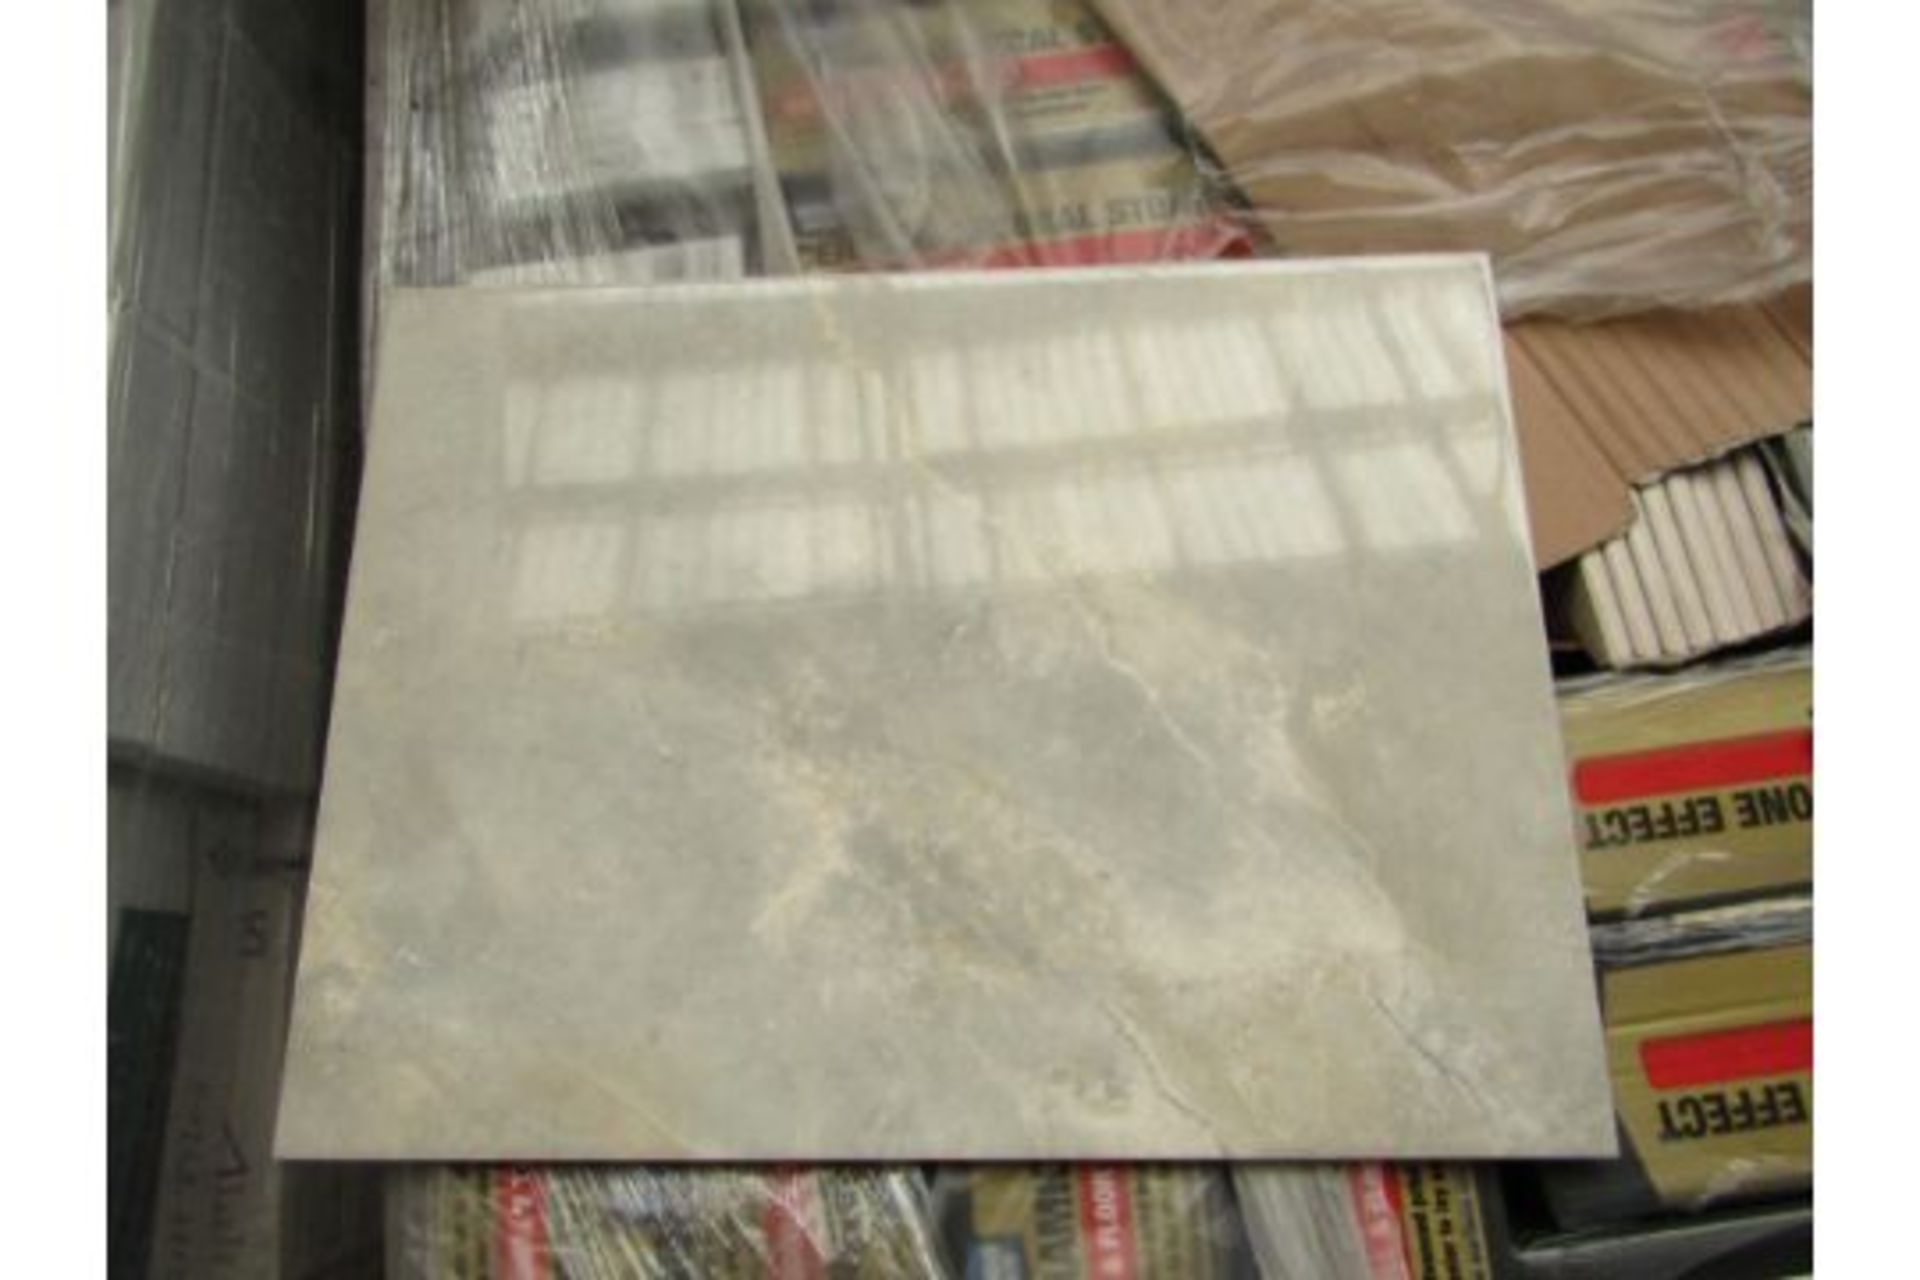 Pallet of 24x Packs of 8 Onyx Gloss 400x300 wall and Floor Tiles By Johnsons, New, the pallet weighs